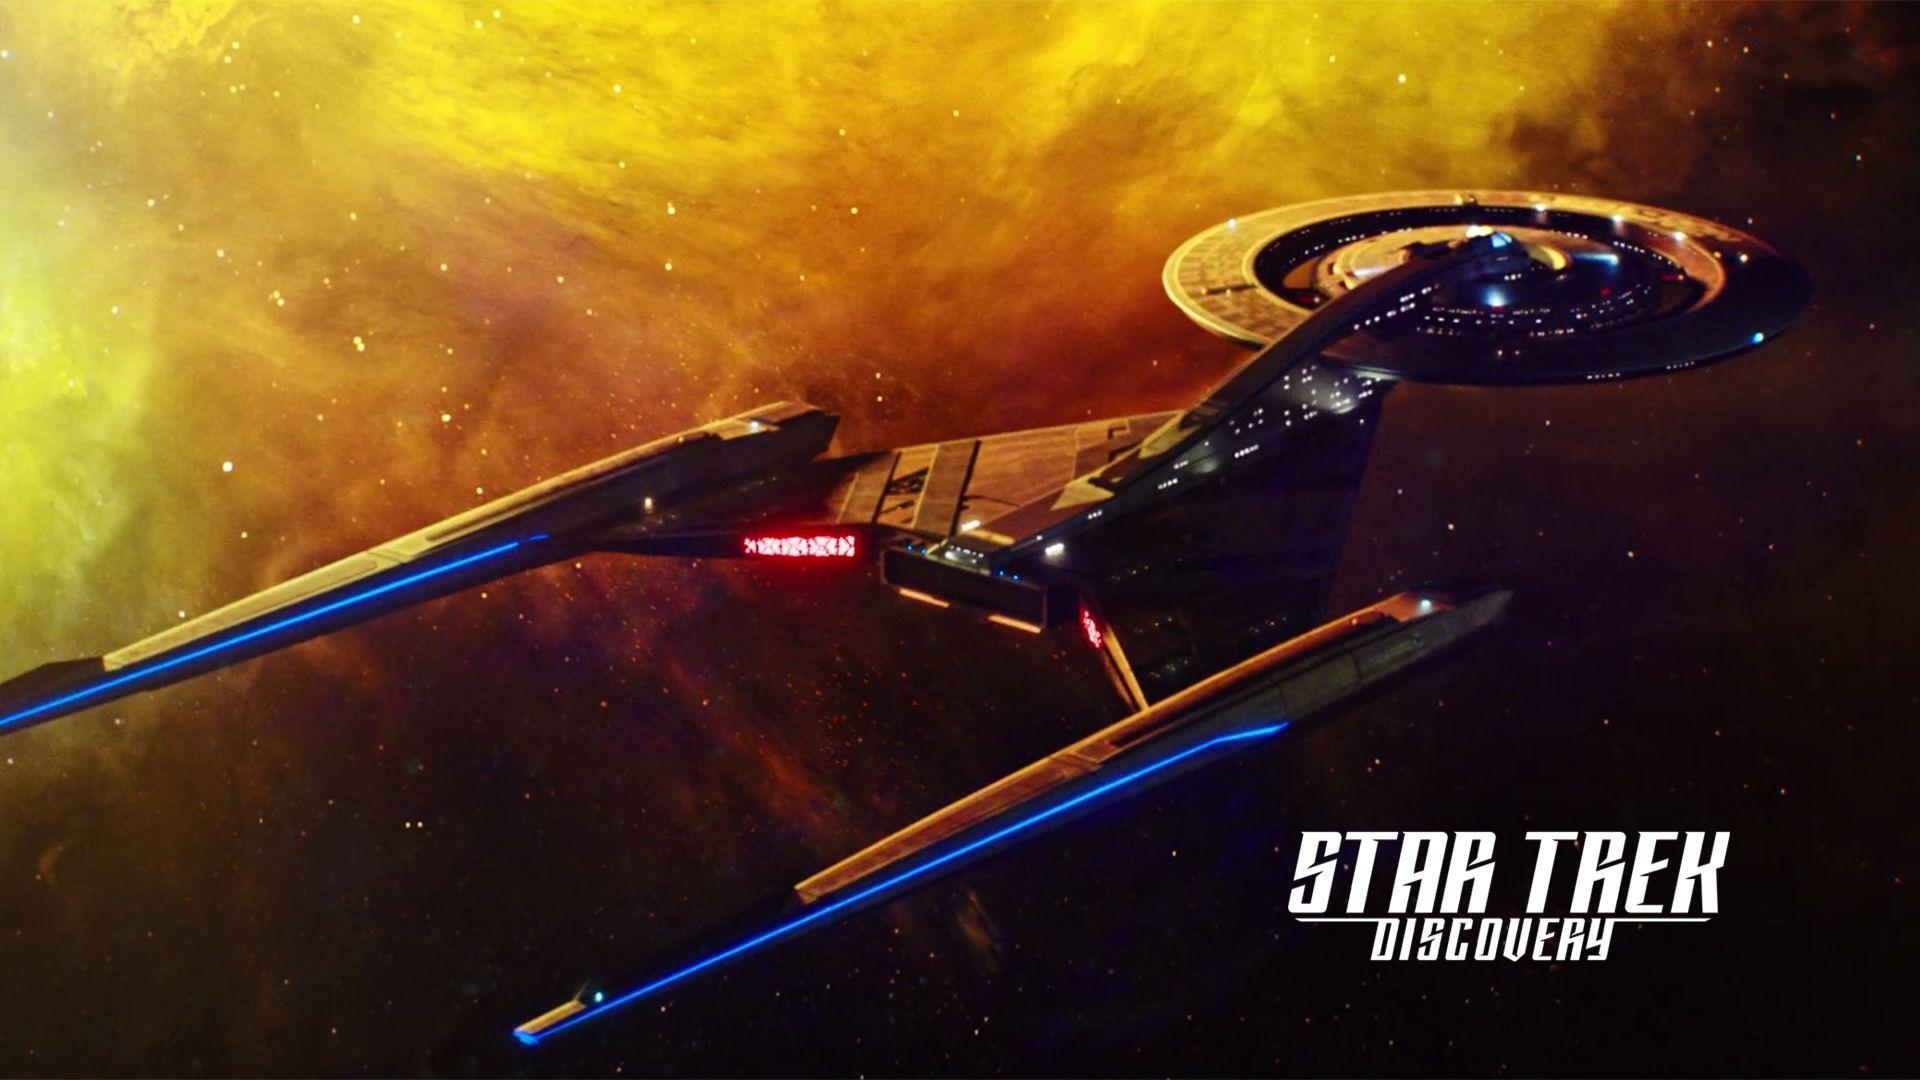 Made a U.S.S. Discovery wallpaper, in one version with and one without the logo, at 1920x1080 pixels